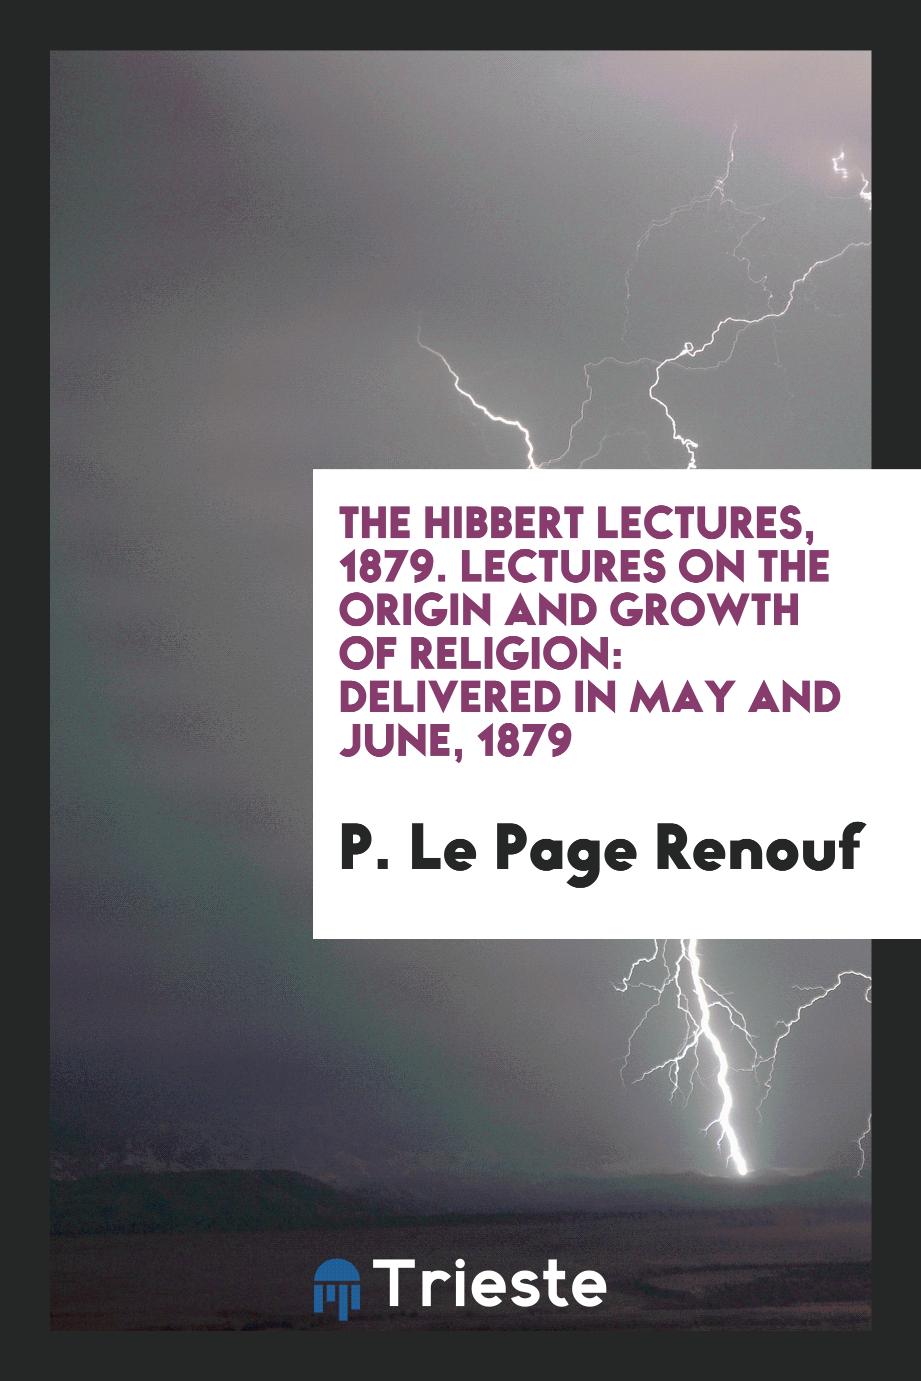 The Hibbert Lectures, 1879. Lectures on the Origin and Growth of Religion: Delivered in May and June, 1879